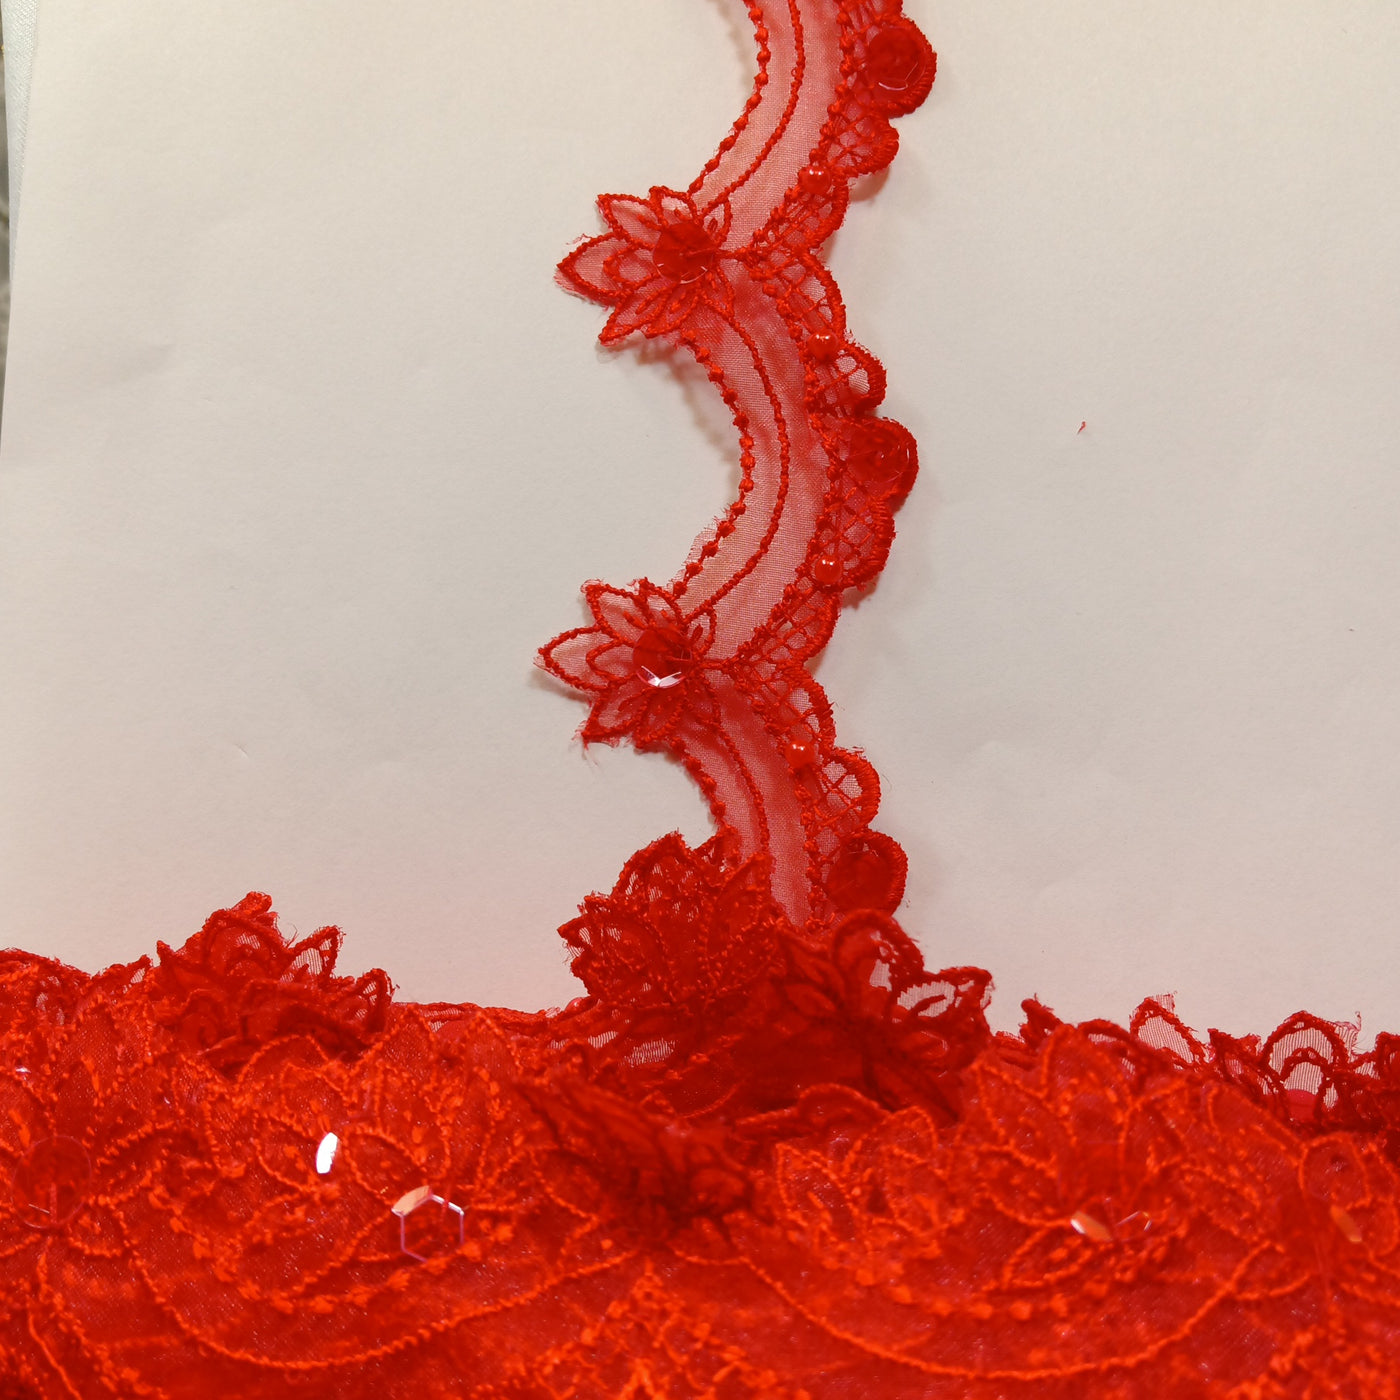 Beaded Red Lace Trim Embroidered on 100% Polyester Organza . Large Arch Scalloped Trim. Formal Trim. Perfect for Edging and Gowns.  Sold by the Yard.  Lace Usa